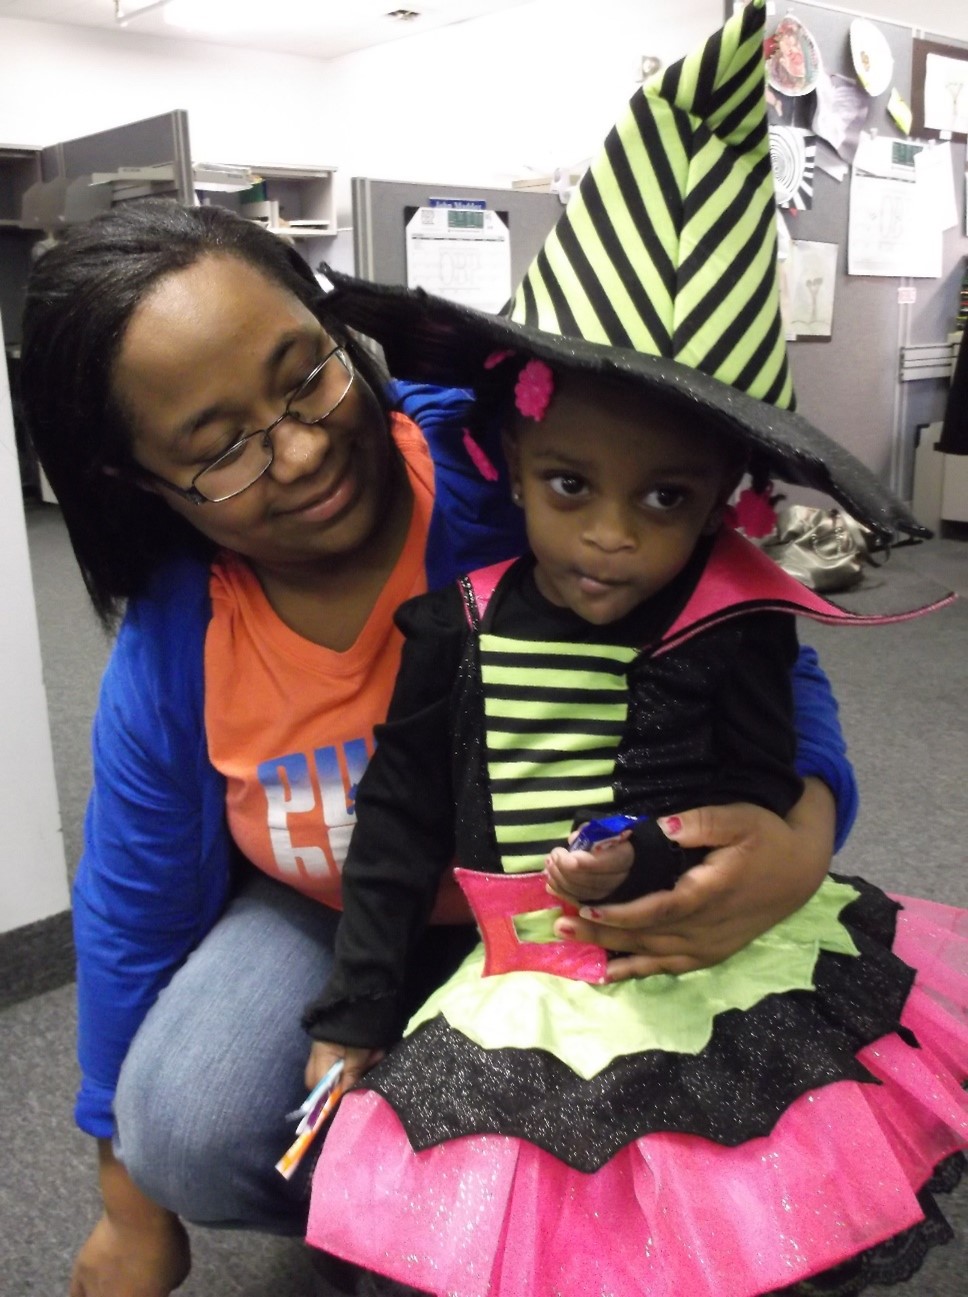 Pam Gillett's daughter Lasha and granddaughter when they came to the plant for trick-or-treating.